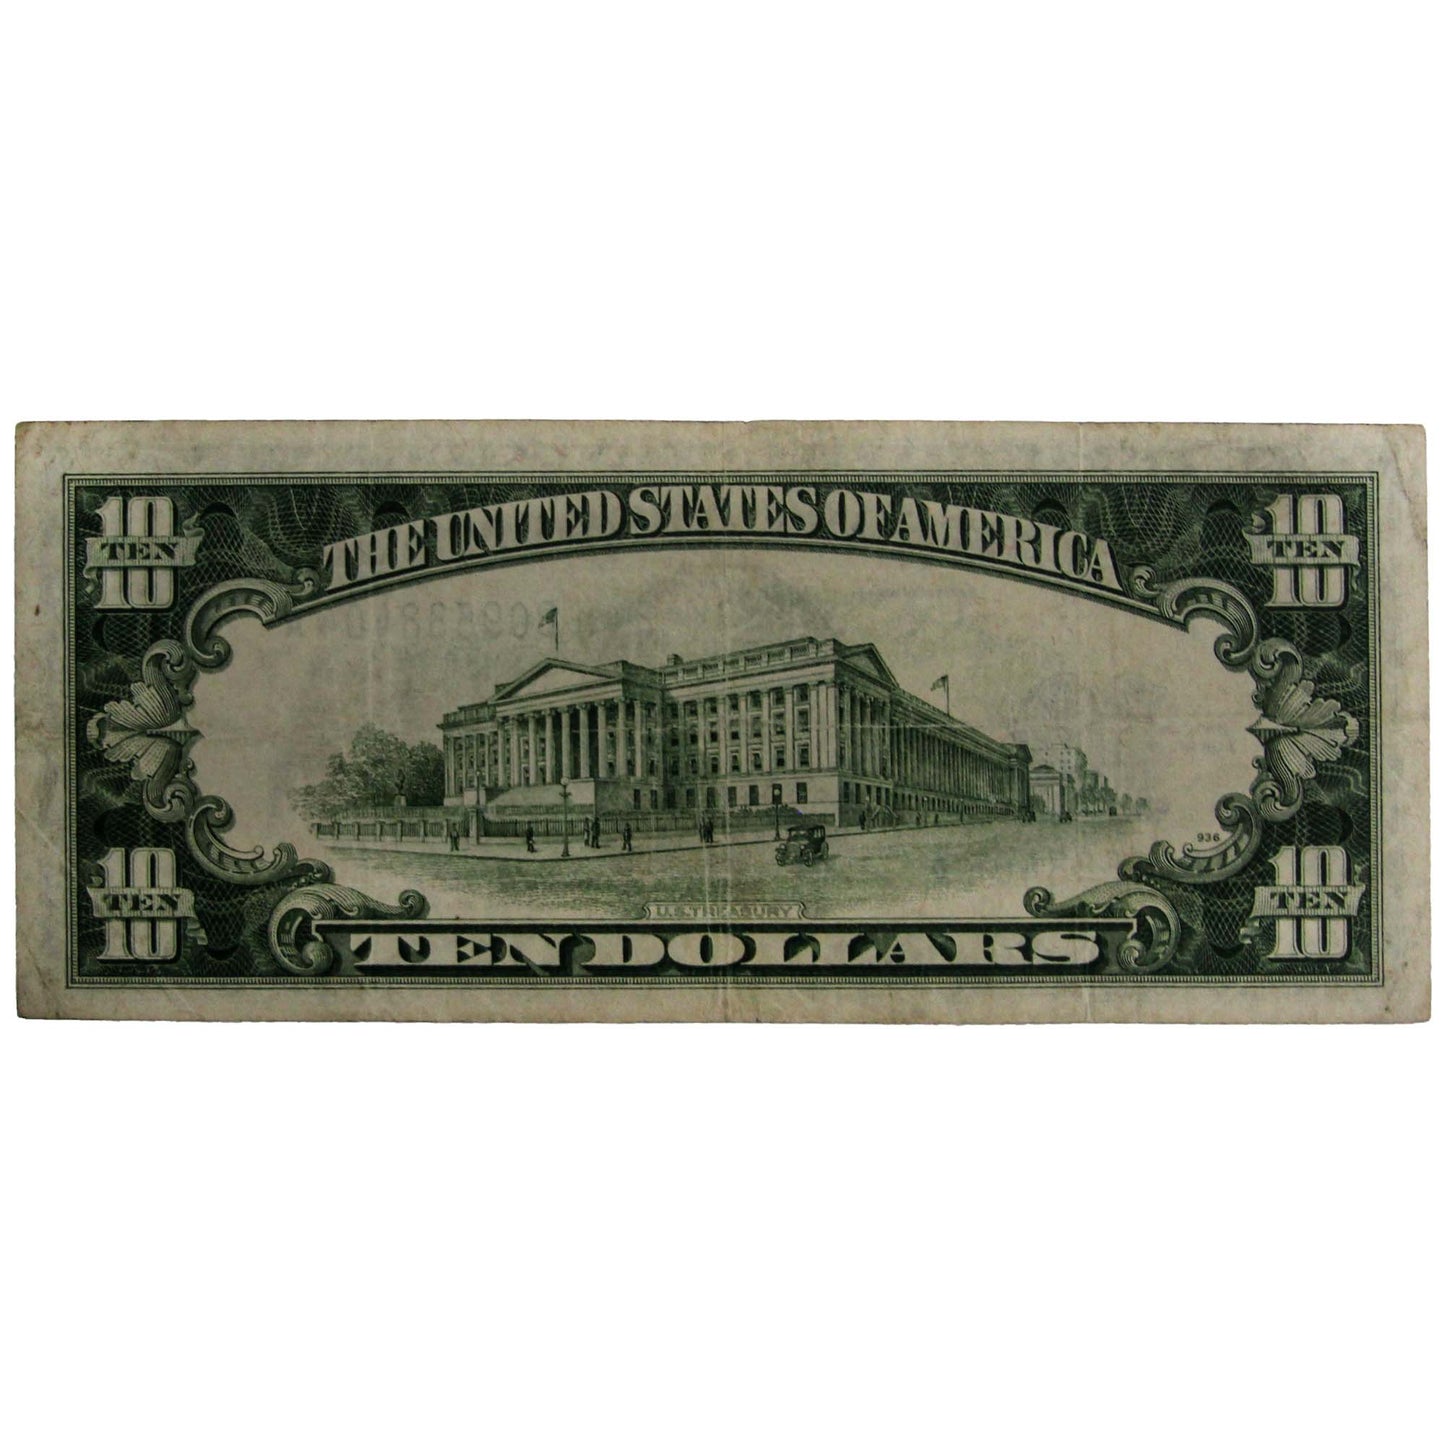 1934 The United States of America Note $10 Back